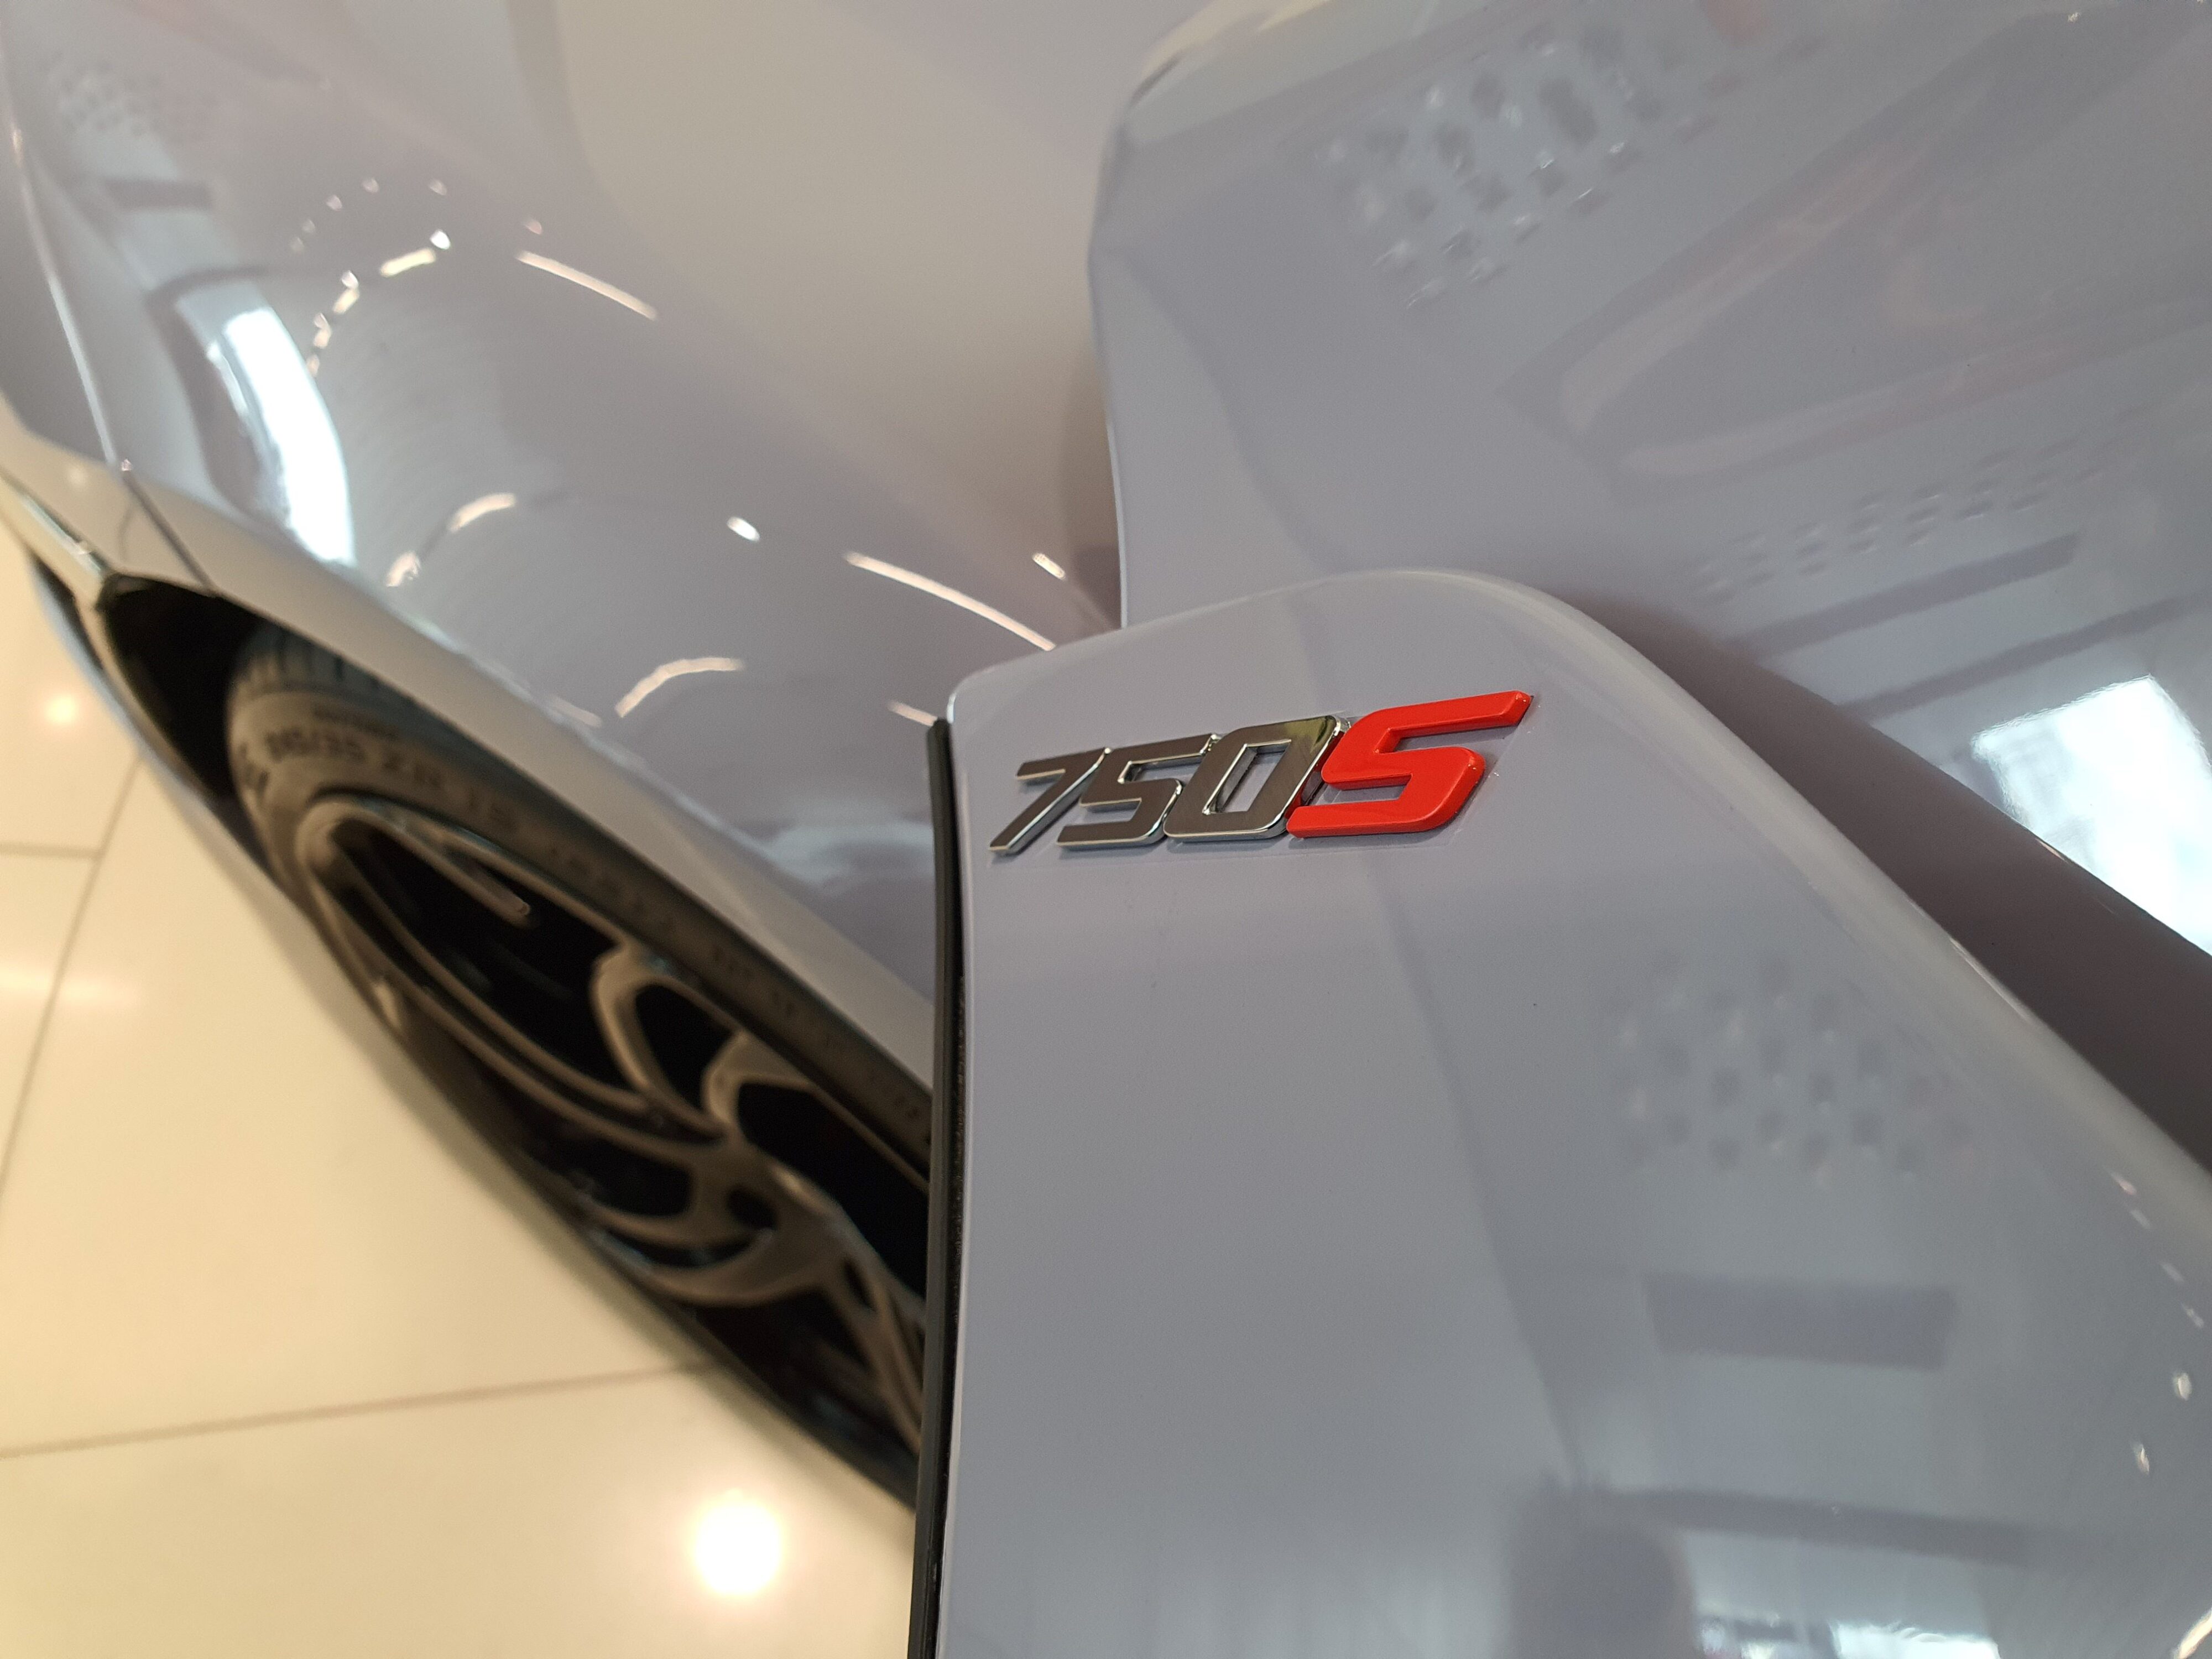 Close up of the 750S badge on the new McLaren 750S supercar at McLaren Auckland.